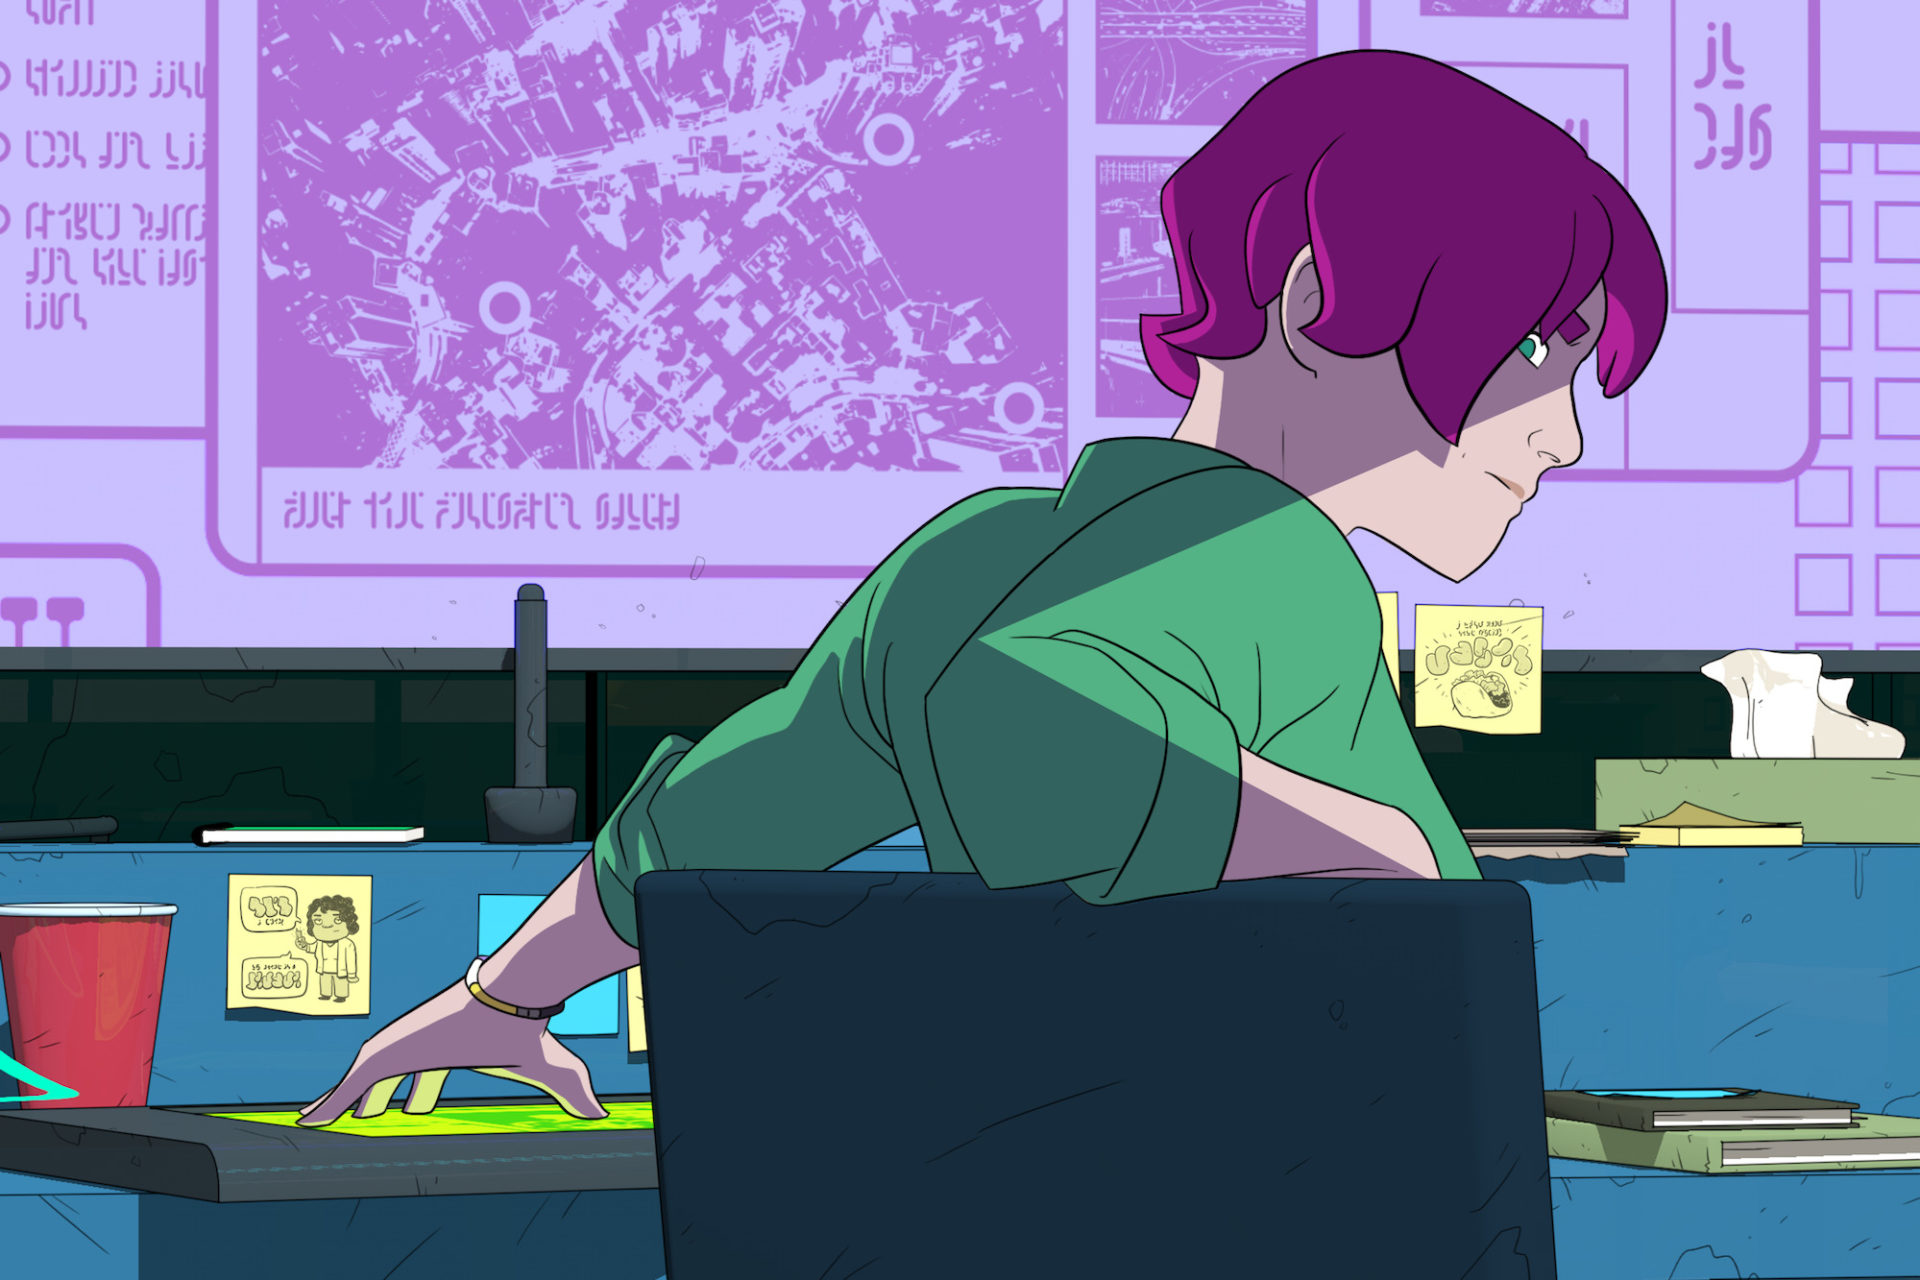 a digital drawing of "Audrey"; a white woman in a green shirt, sitting at a desk, turning in her chair to the right. The back wall is purple.